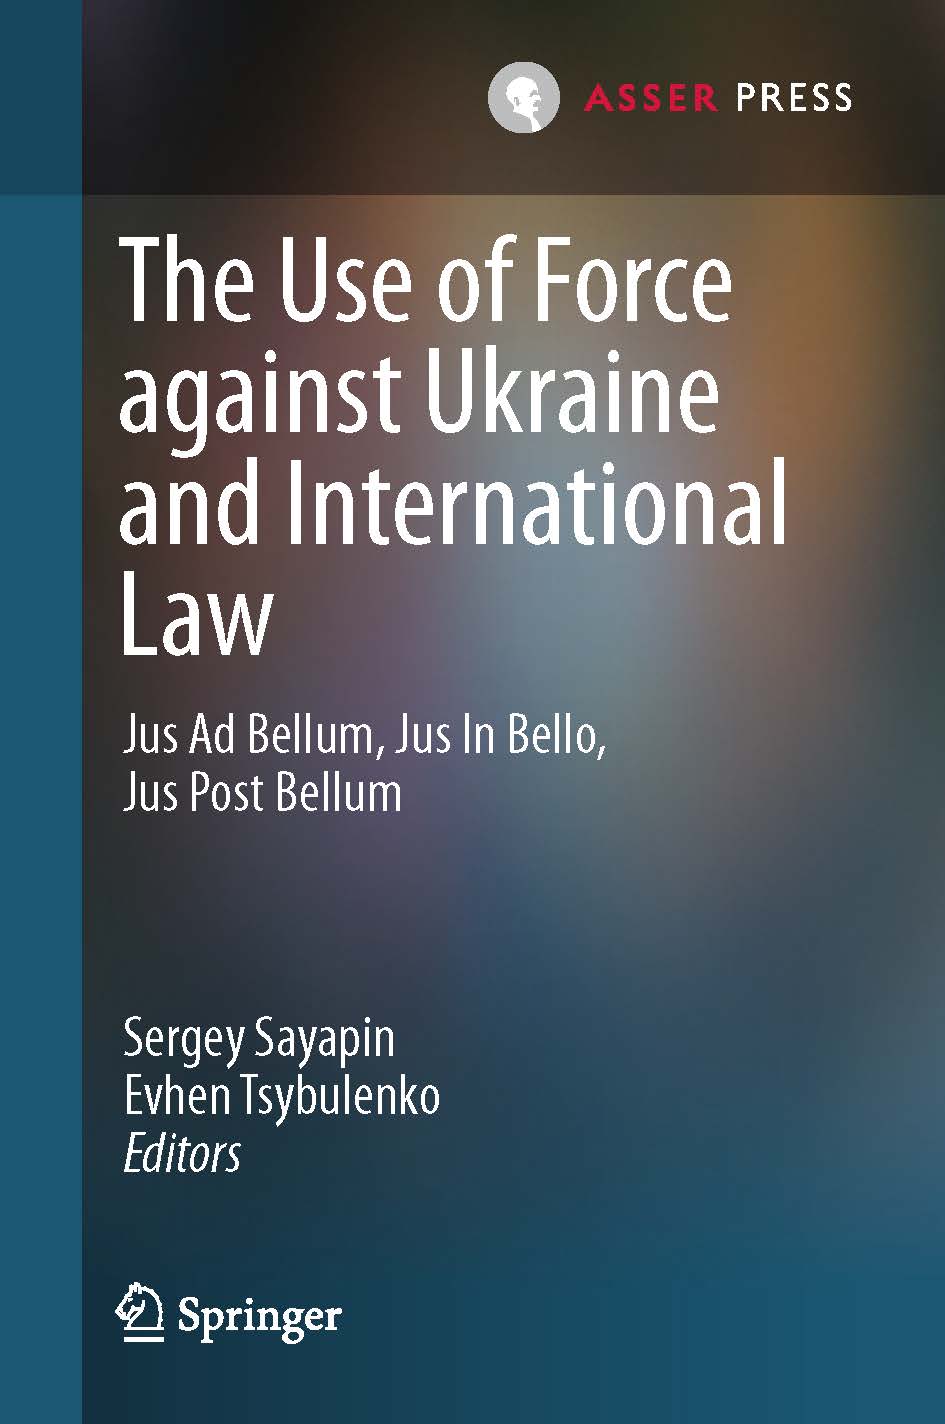 The Use of Force against Ukraine and International Law - Jus ad Bellum, Jus in Bello, Jus Post Bellum